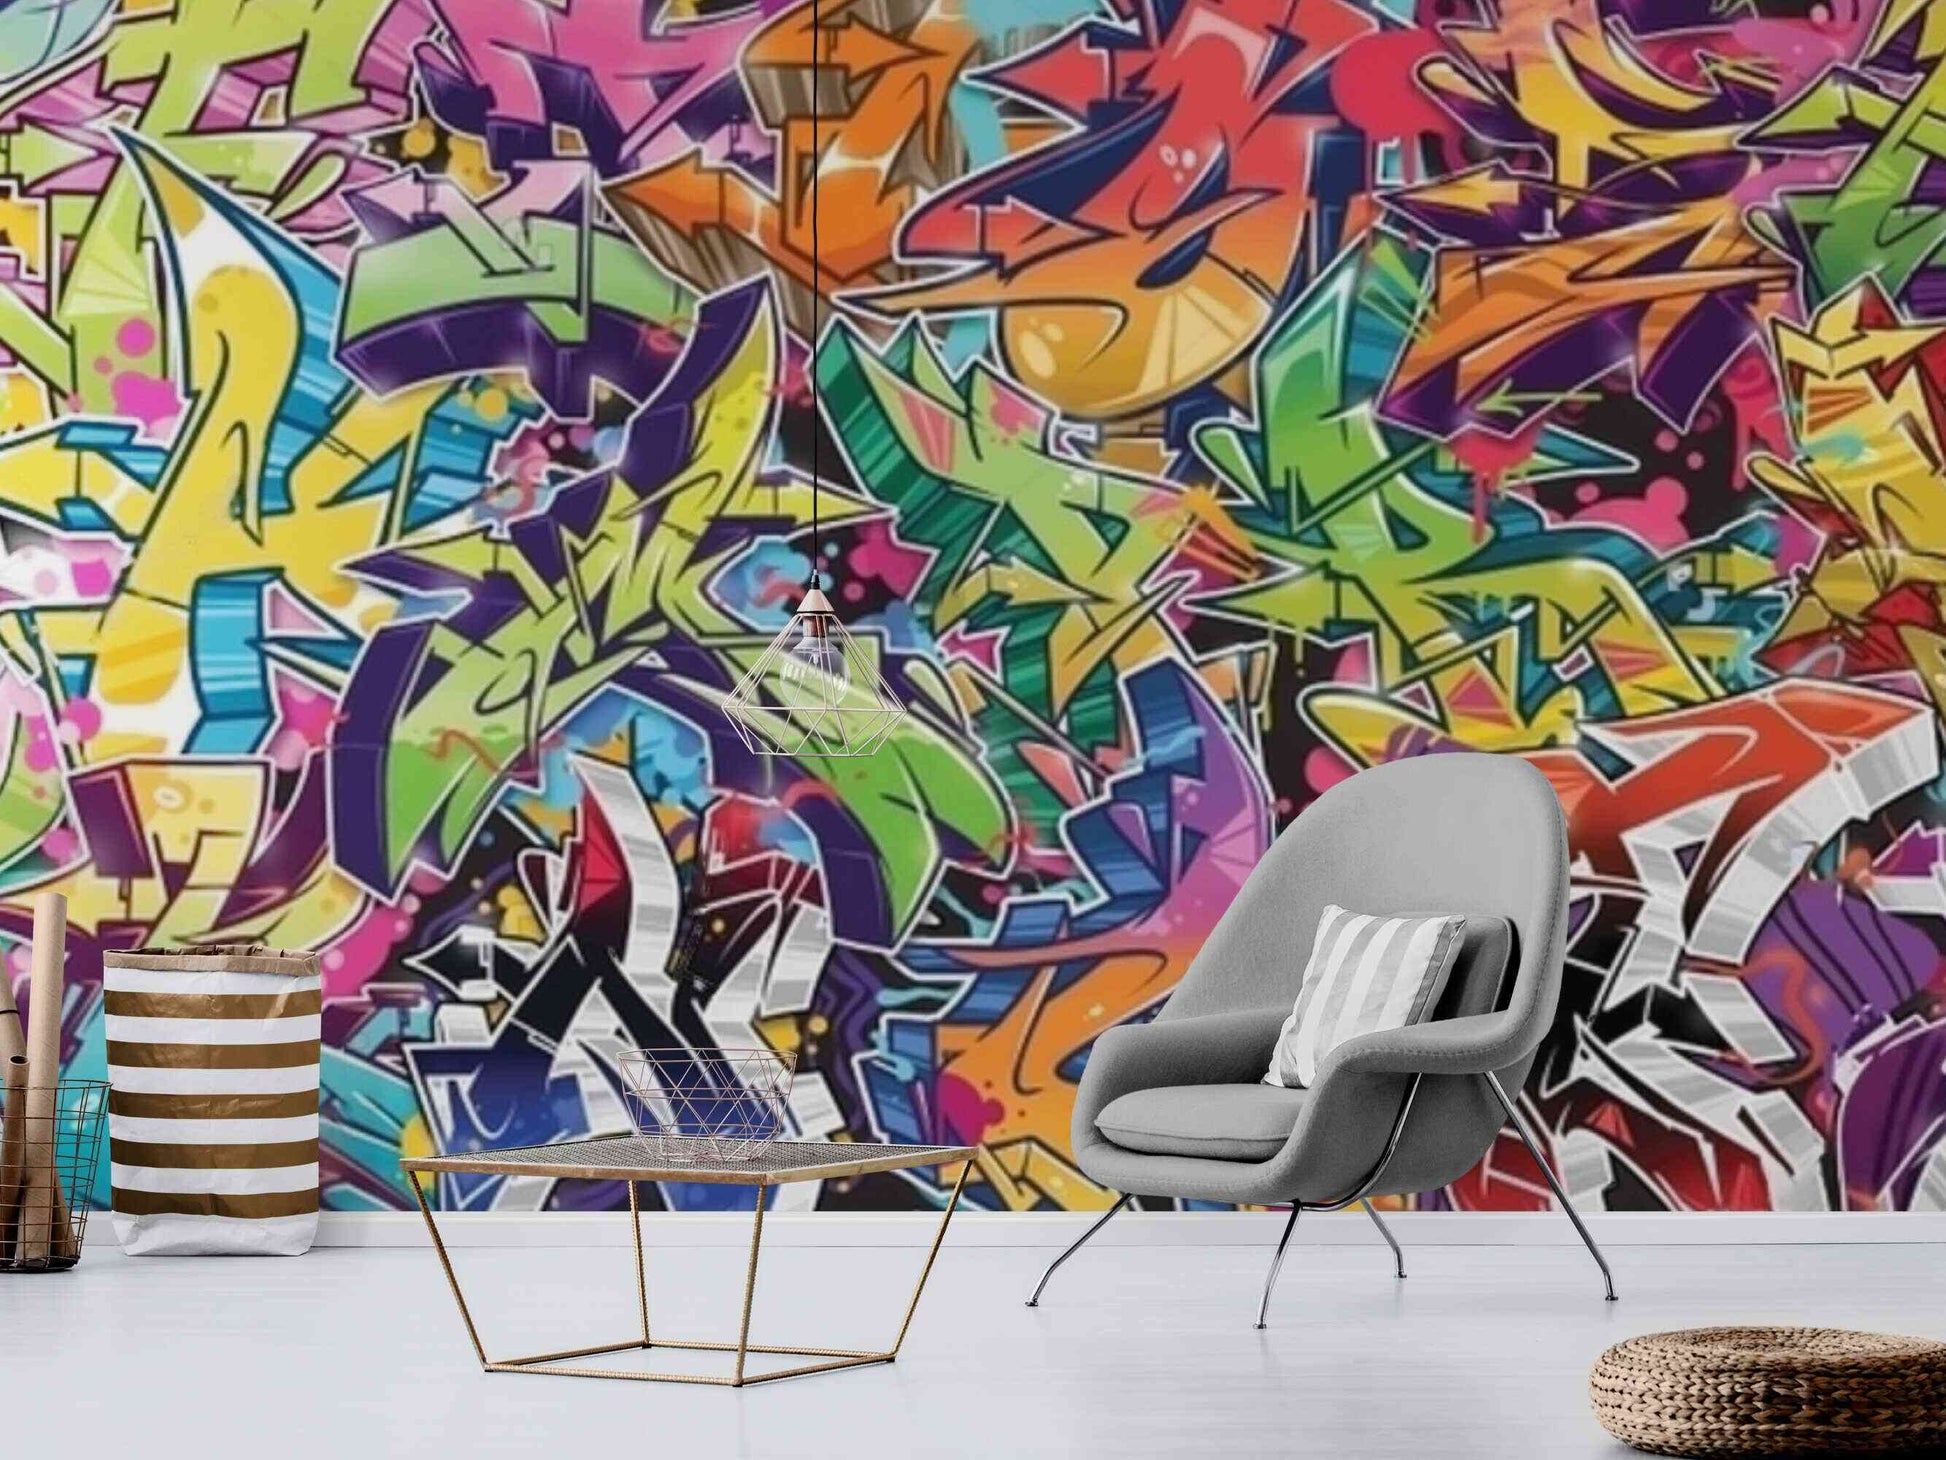 Close-up view of a vibrant street art-inspired wall mural